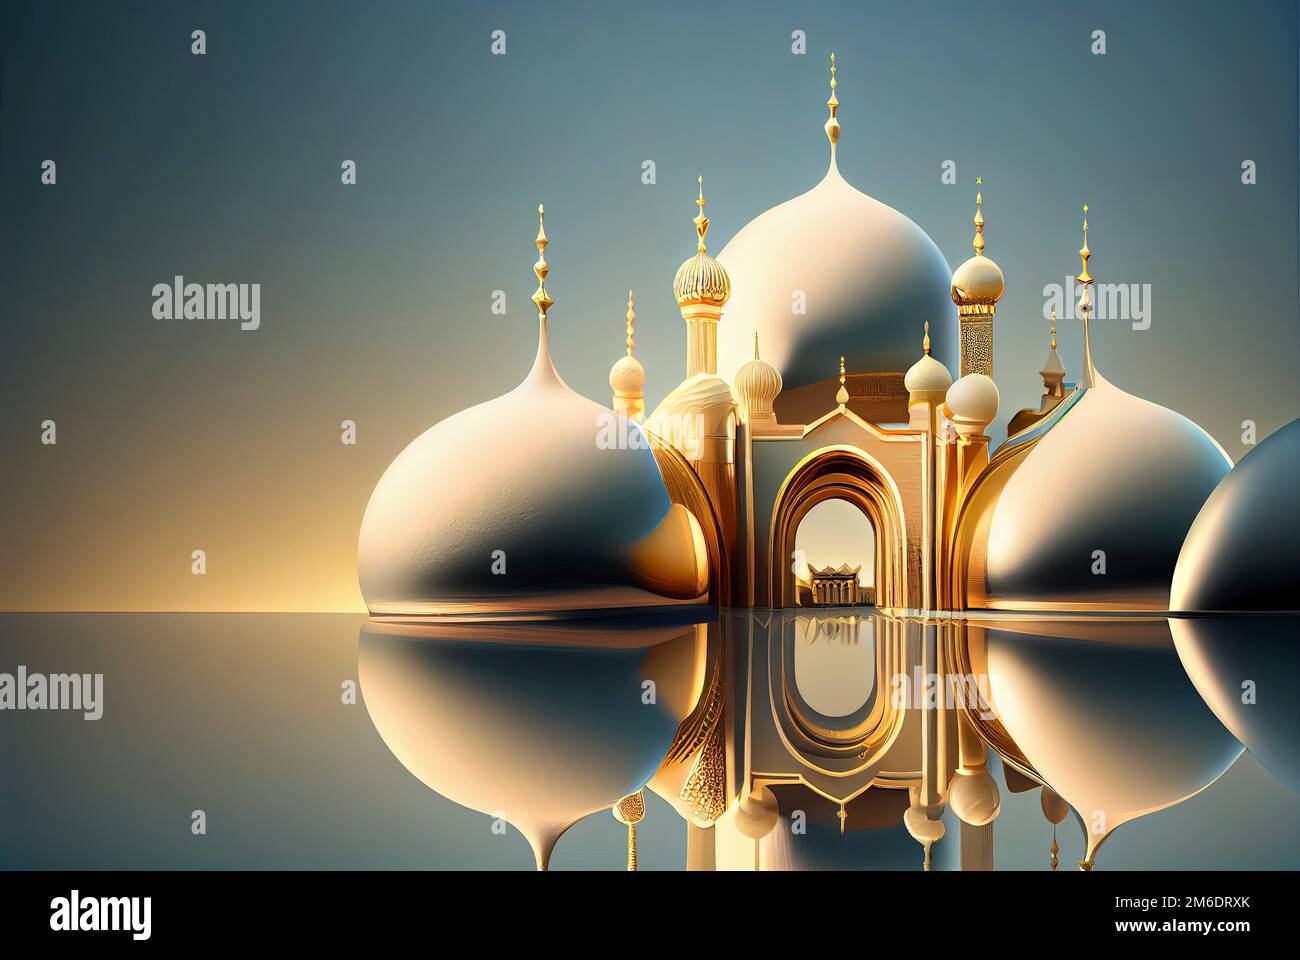 Illustration of ramadan background with golden mosque Stock Photo